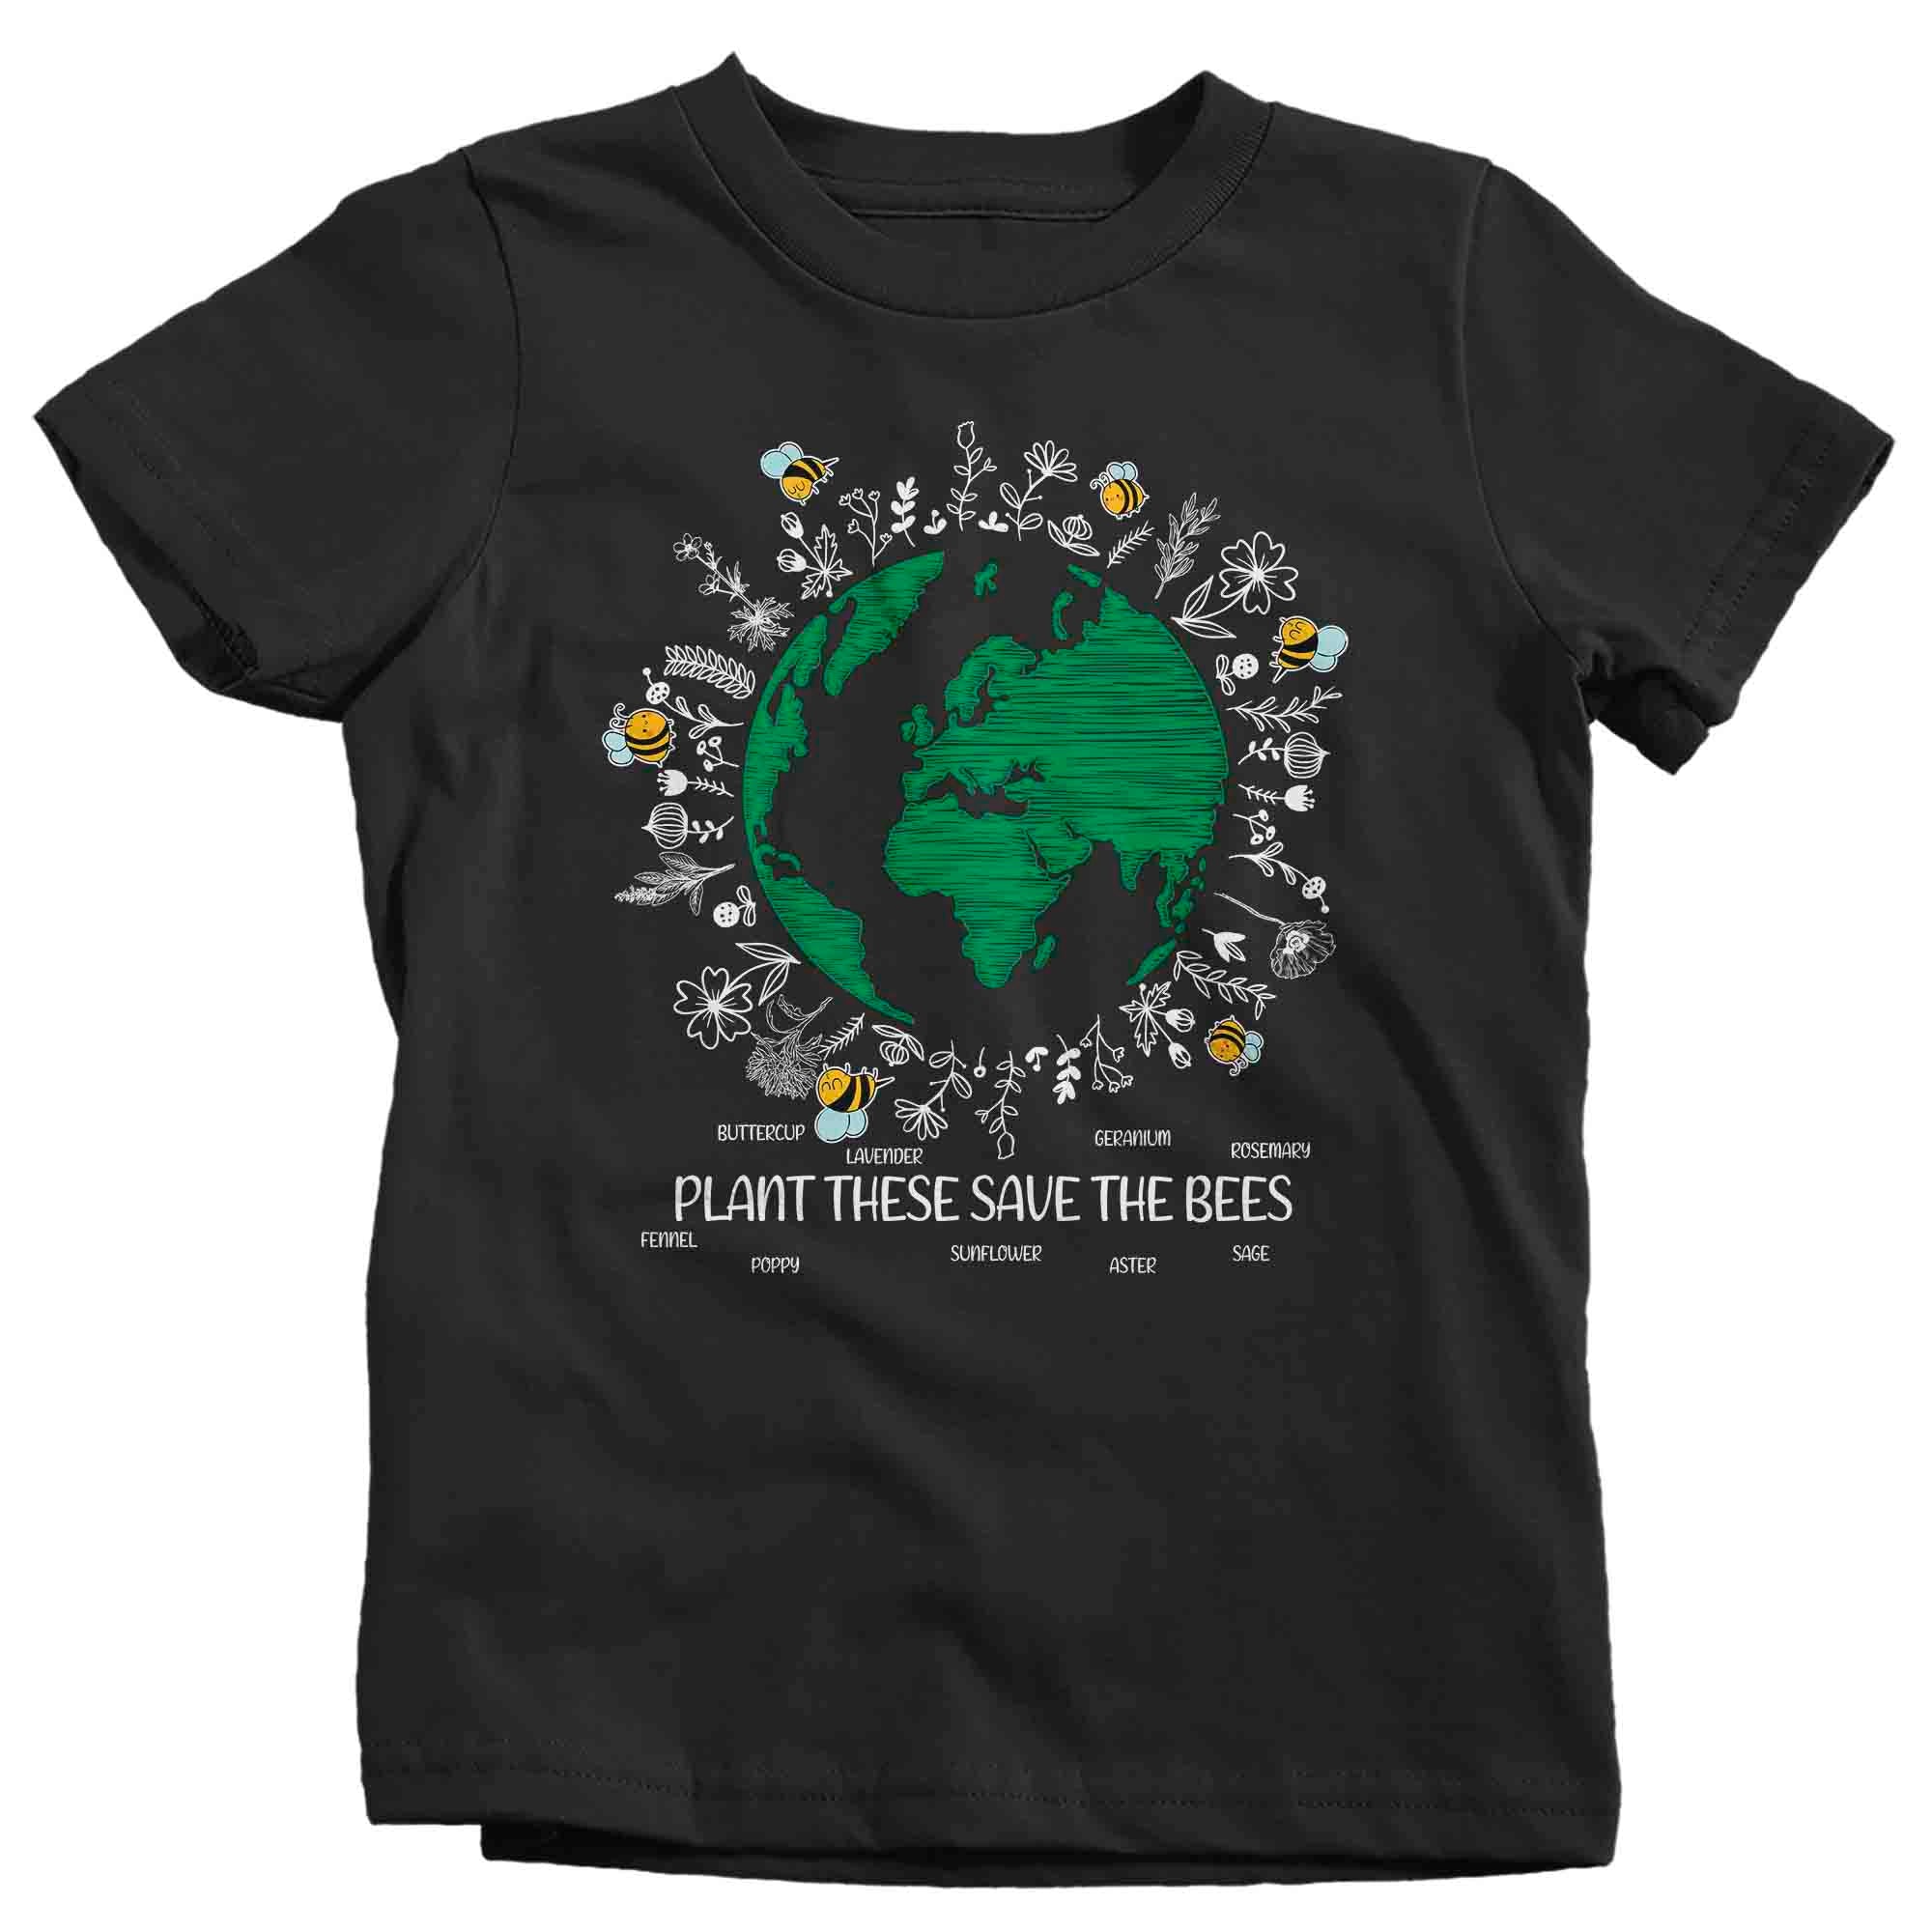 Kids Earth Day Shirt Plant These T Shirt Forest Farming Save The Bees Climate Change Global Warming Gift Shirt Boy’S Girl’S Unisex Tshirt